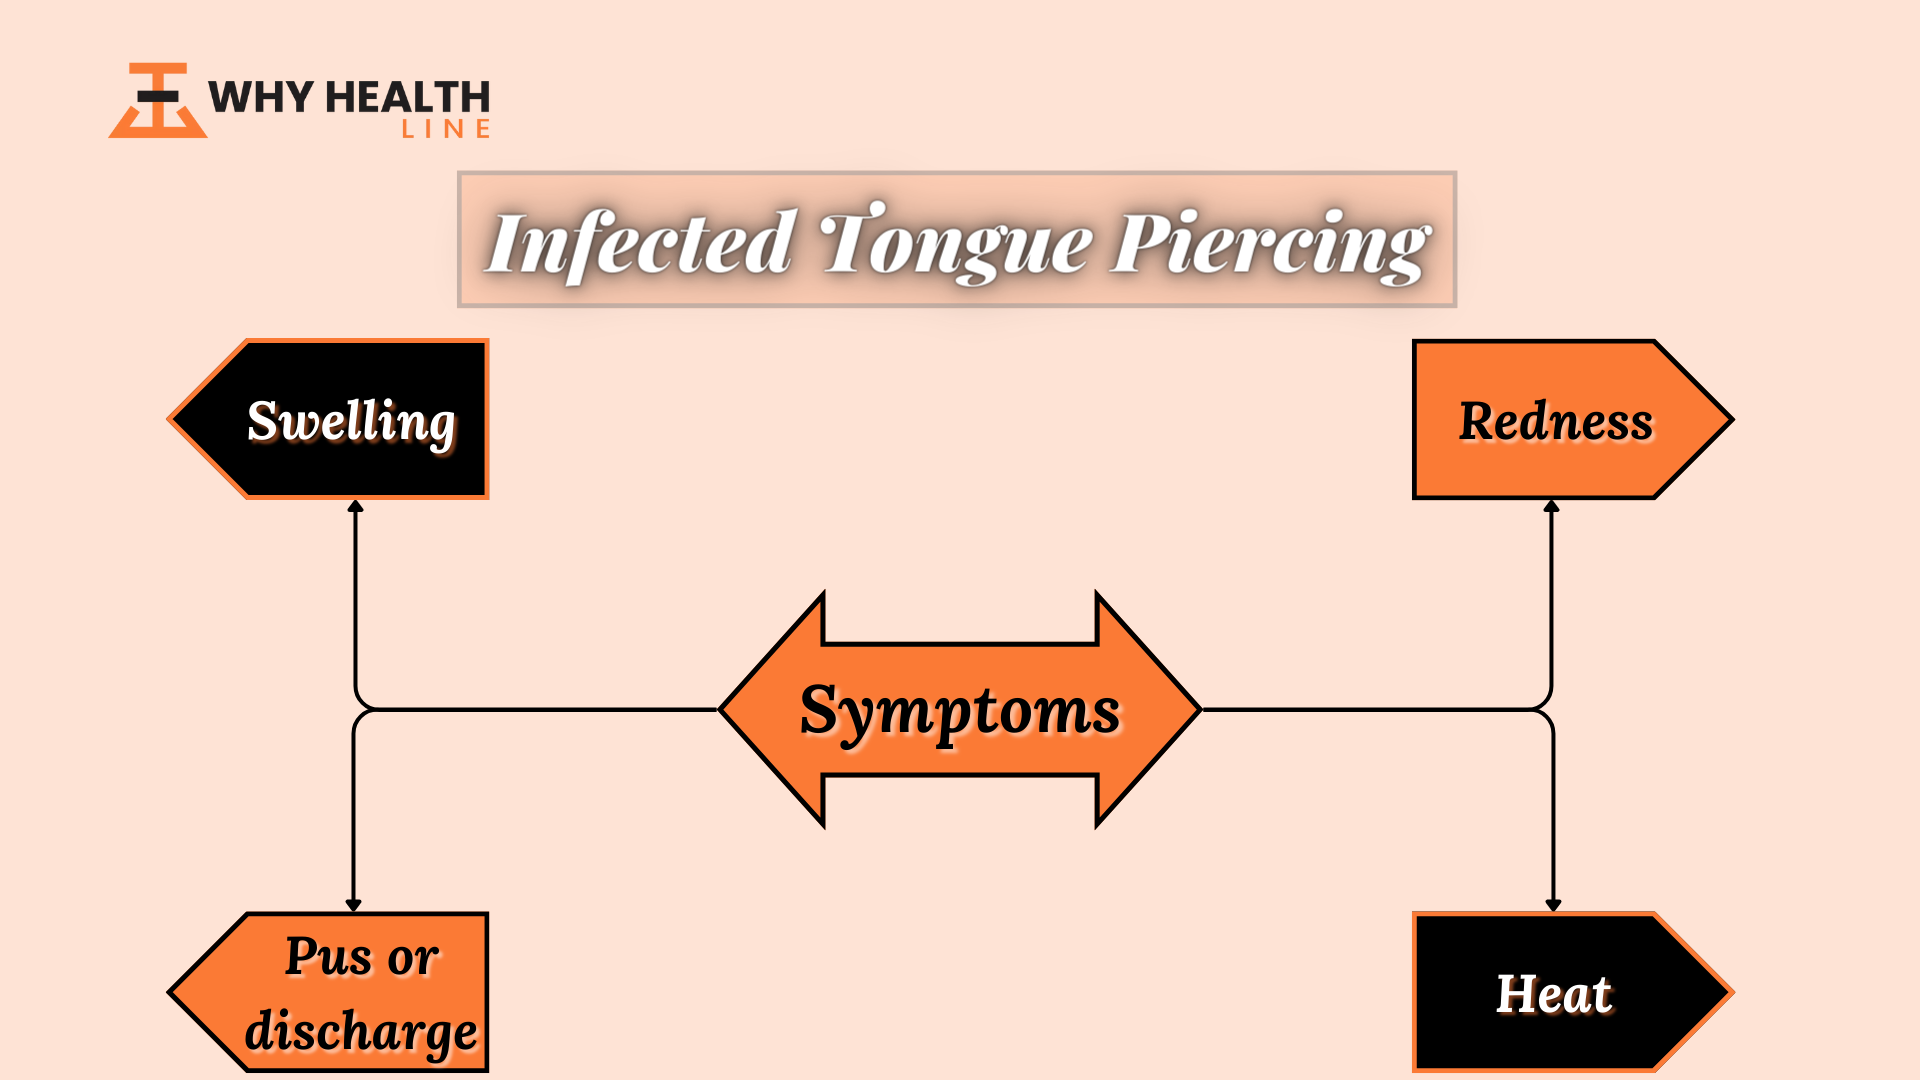 Symptoms of Infected Tongue Piercing